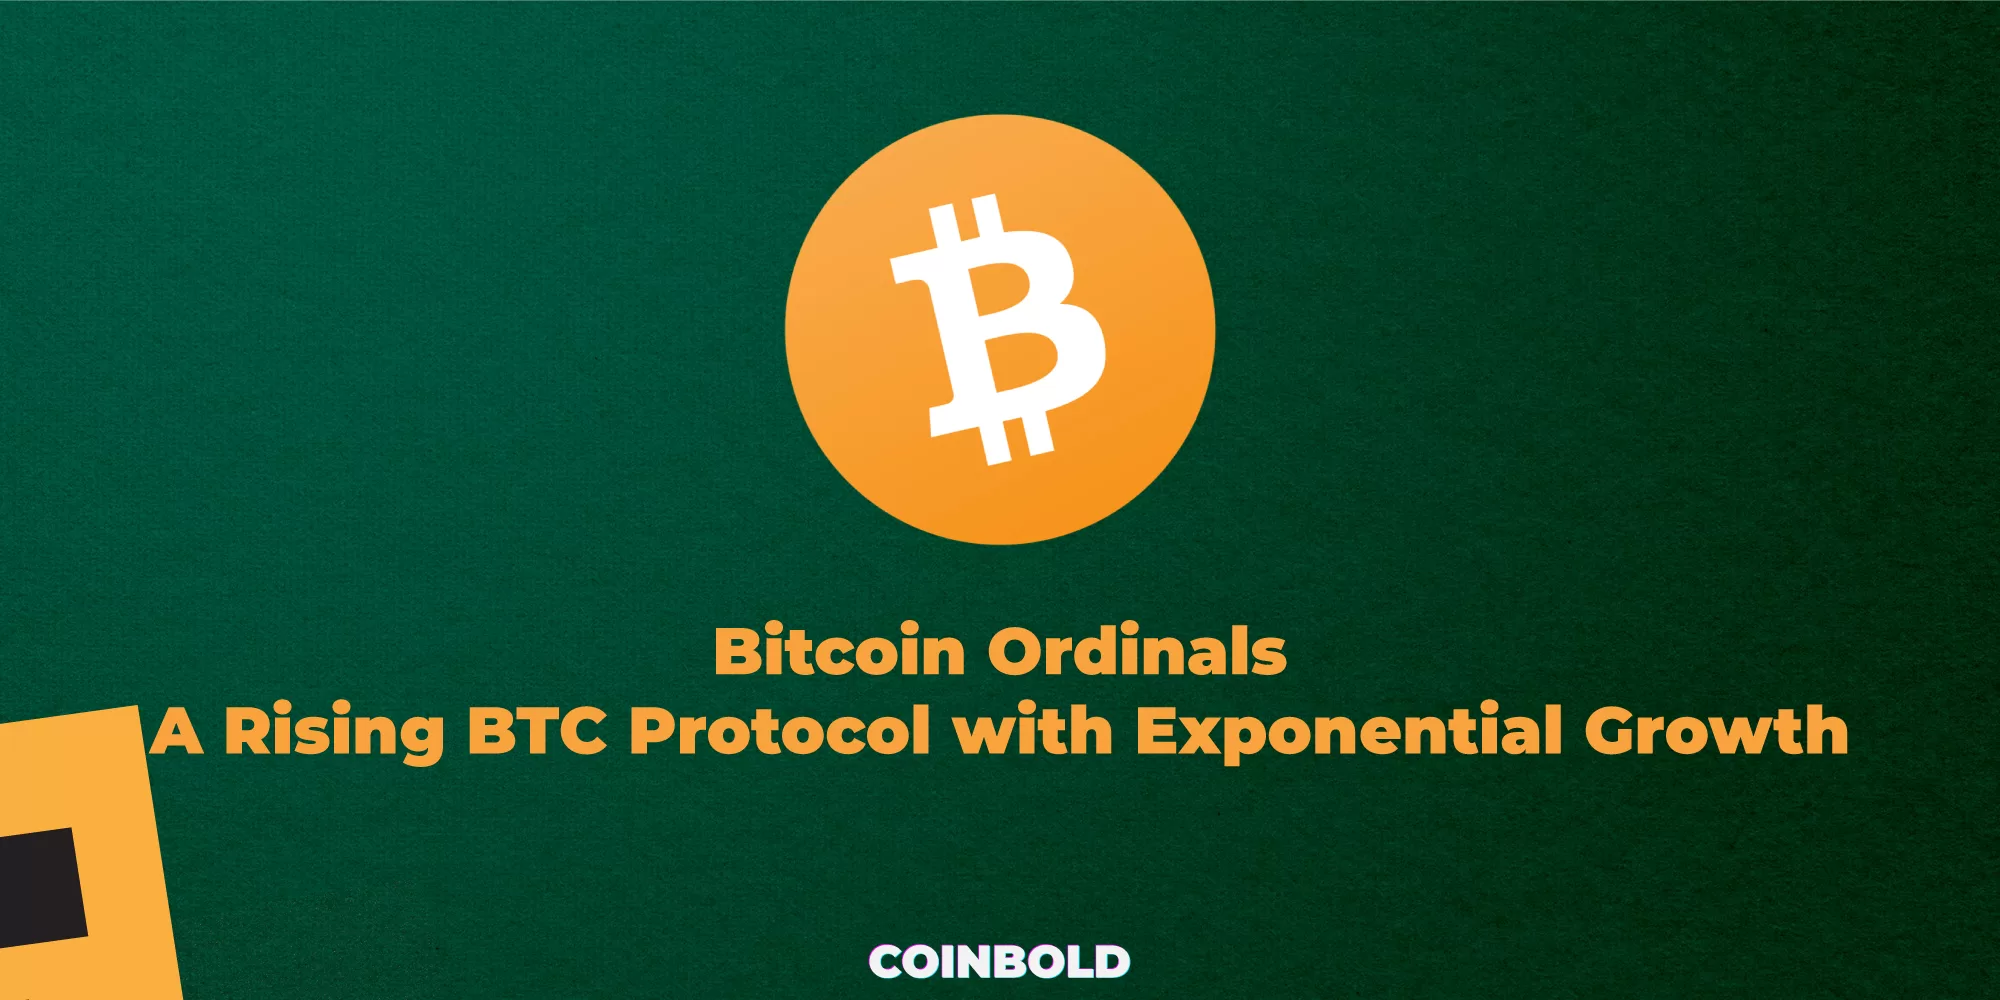 Bitcoin Ordinals: A Rising BTC Protocol with Exponential Growth